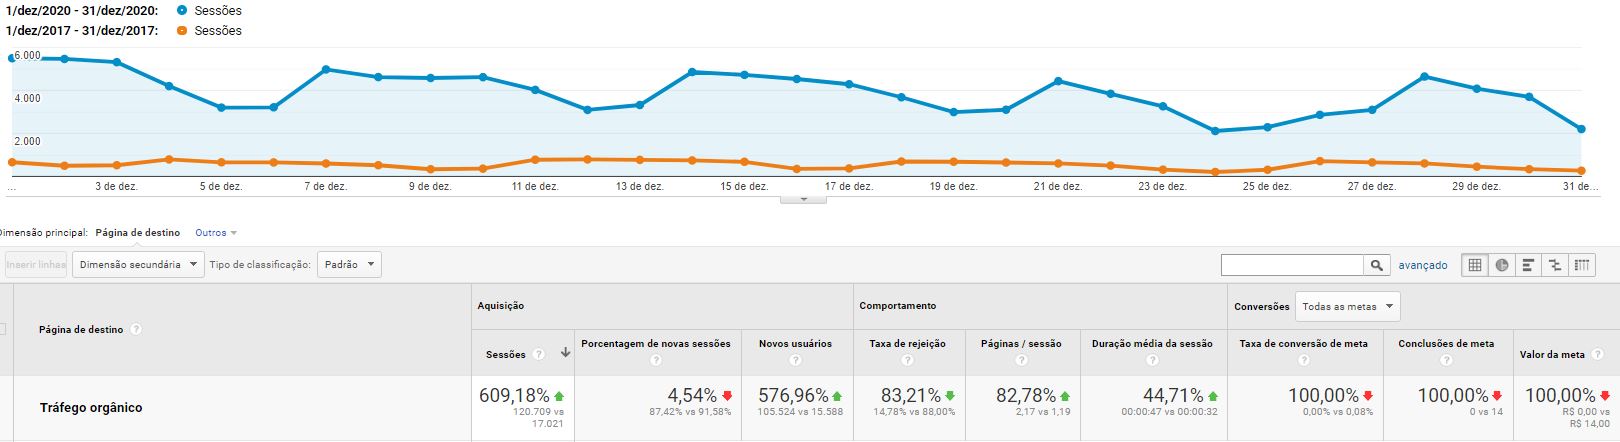 7 proven strategies to increase organic traffic to your website